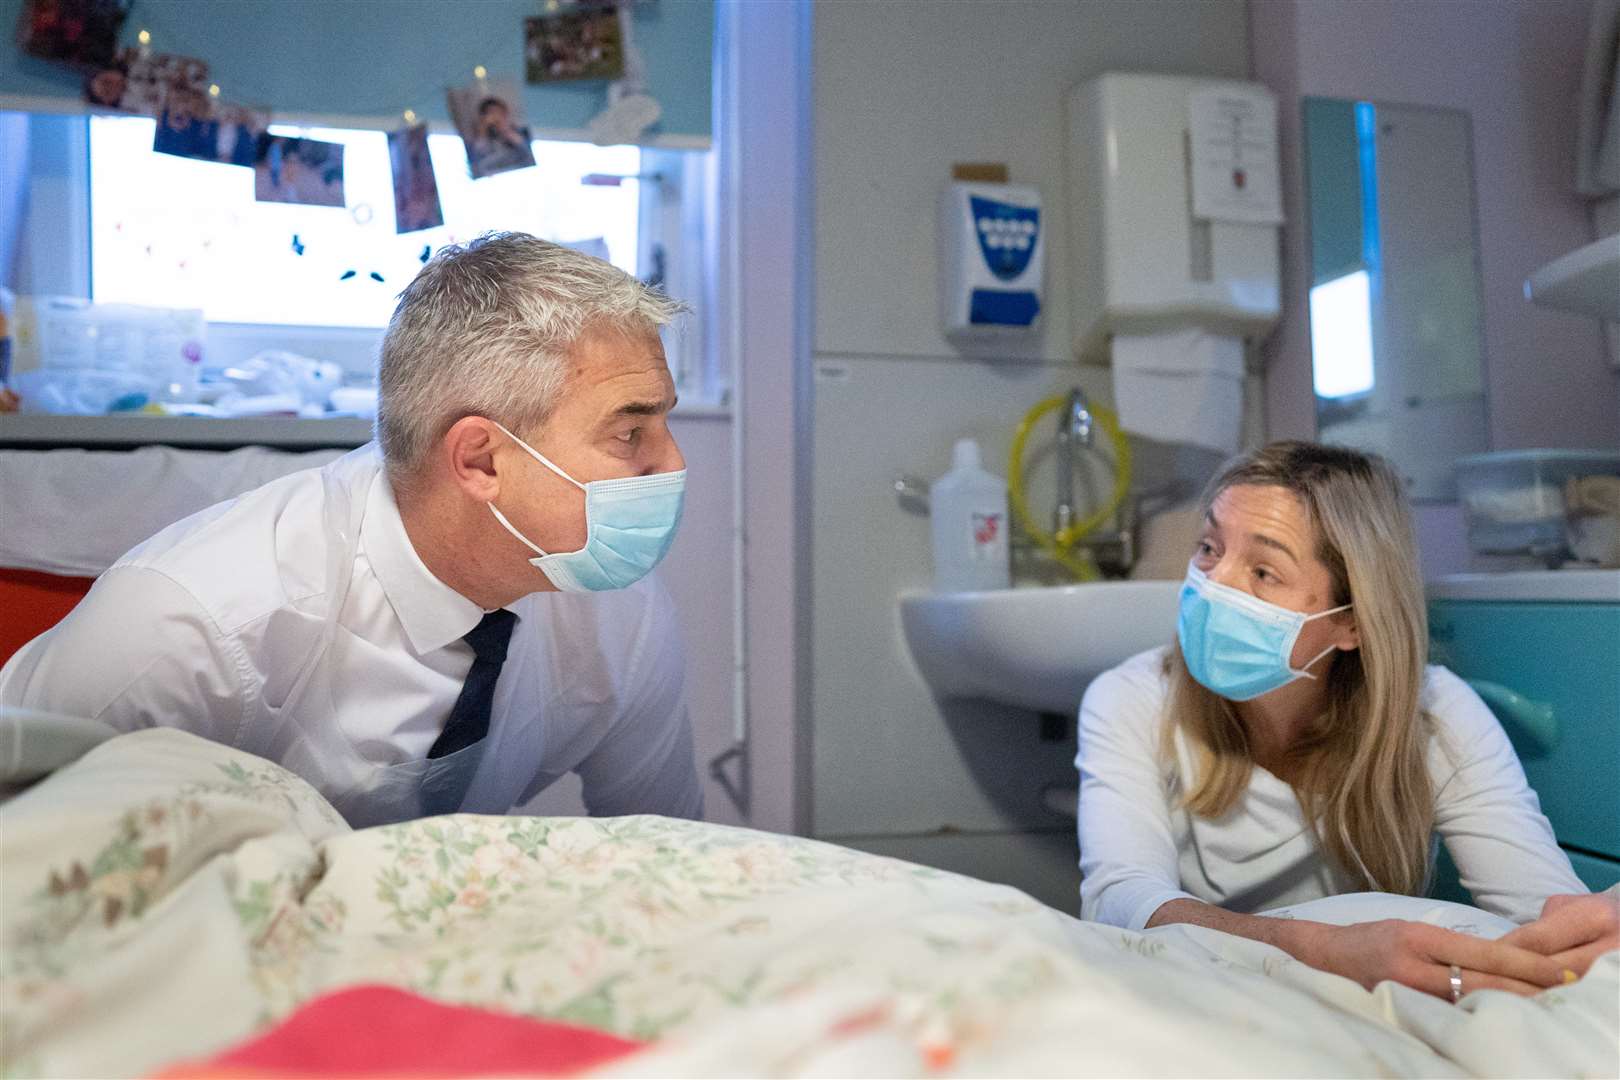 Health Secretary Steve Barclay meets Sarah Pinnington-Auld and her three-year-old daughter Lucy during a visit to King’s College University Hospital in London (Stefan Rousseau/PA)